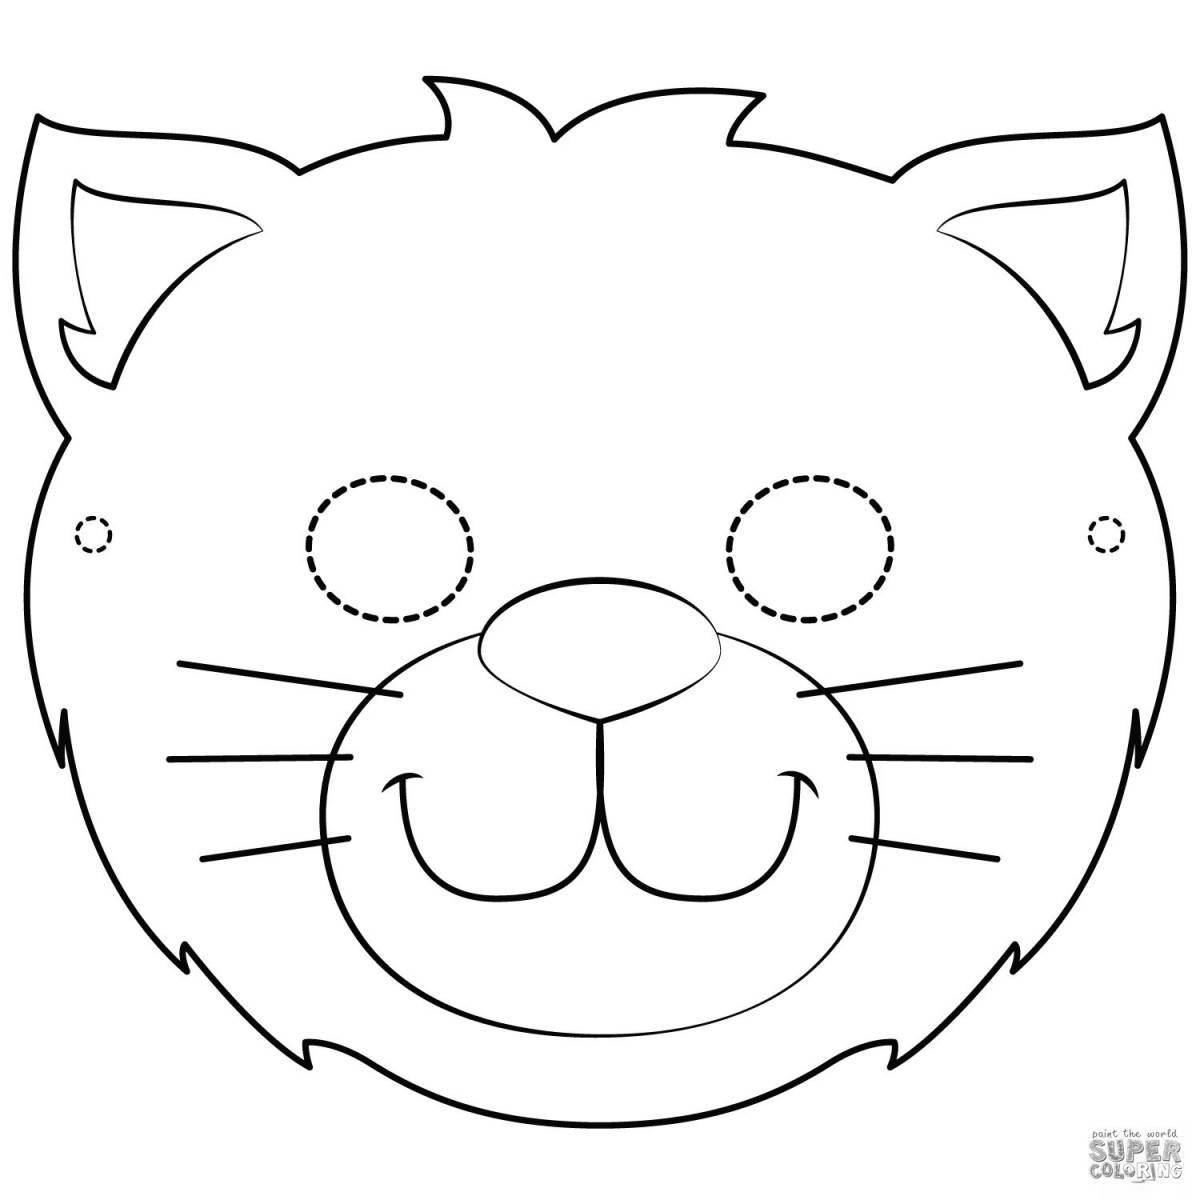 Curious cat face coloring page